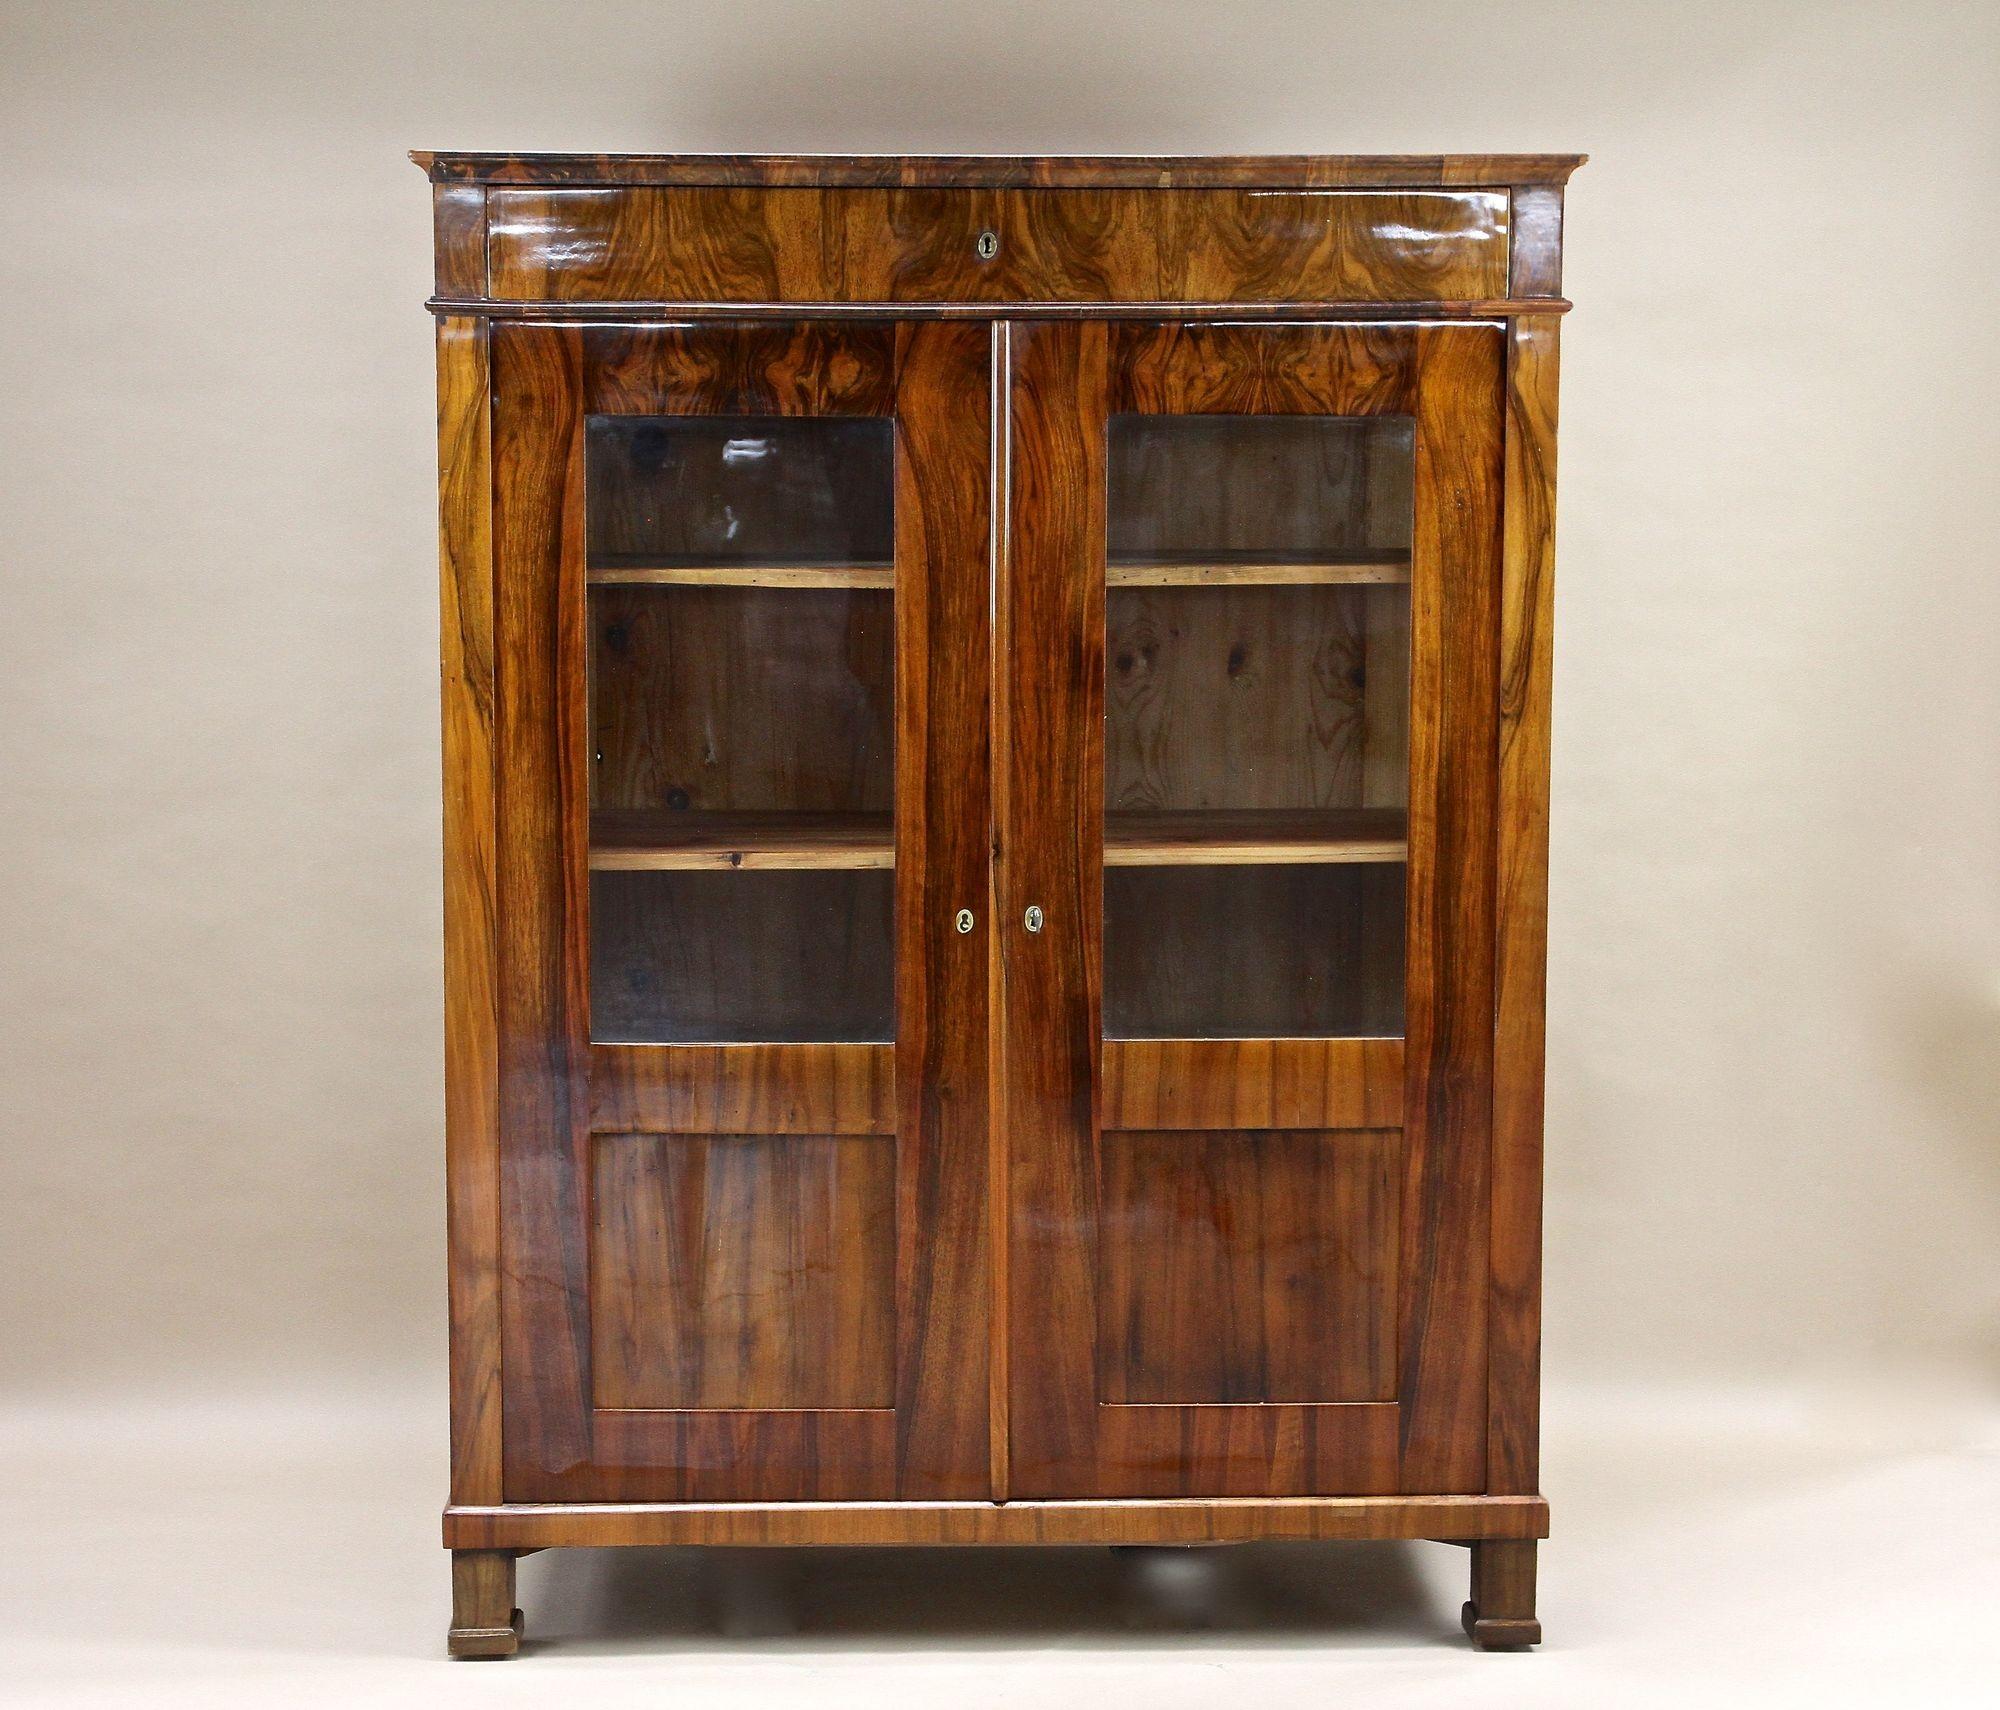 Remarkable 19th century Biedermeier walnut cabinet/ bookcase/ vitrine coming from the early period in Austria around 1835. Elaborately veneered in finest burr walnut the glossy surface shows an absolutel amazing grain. The front of this exceptional